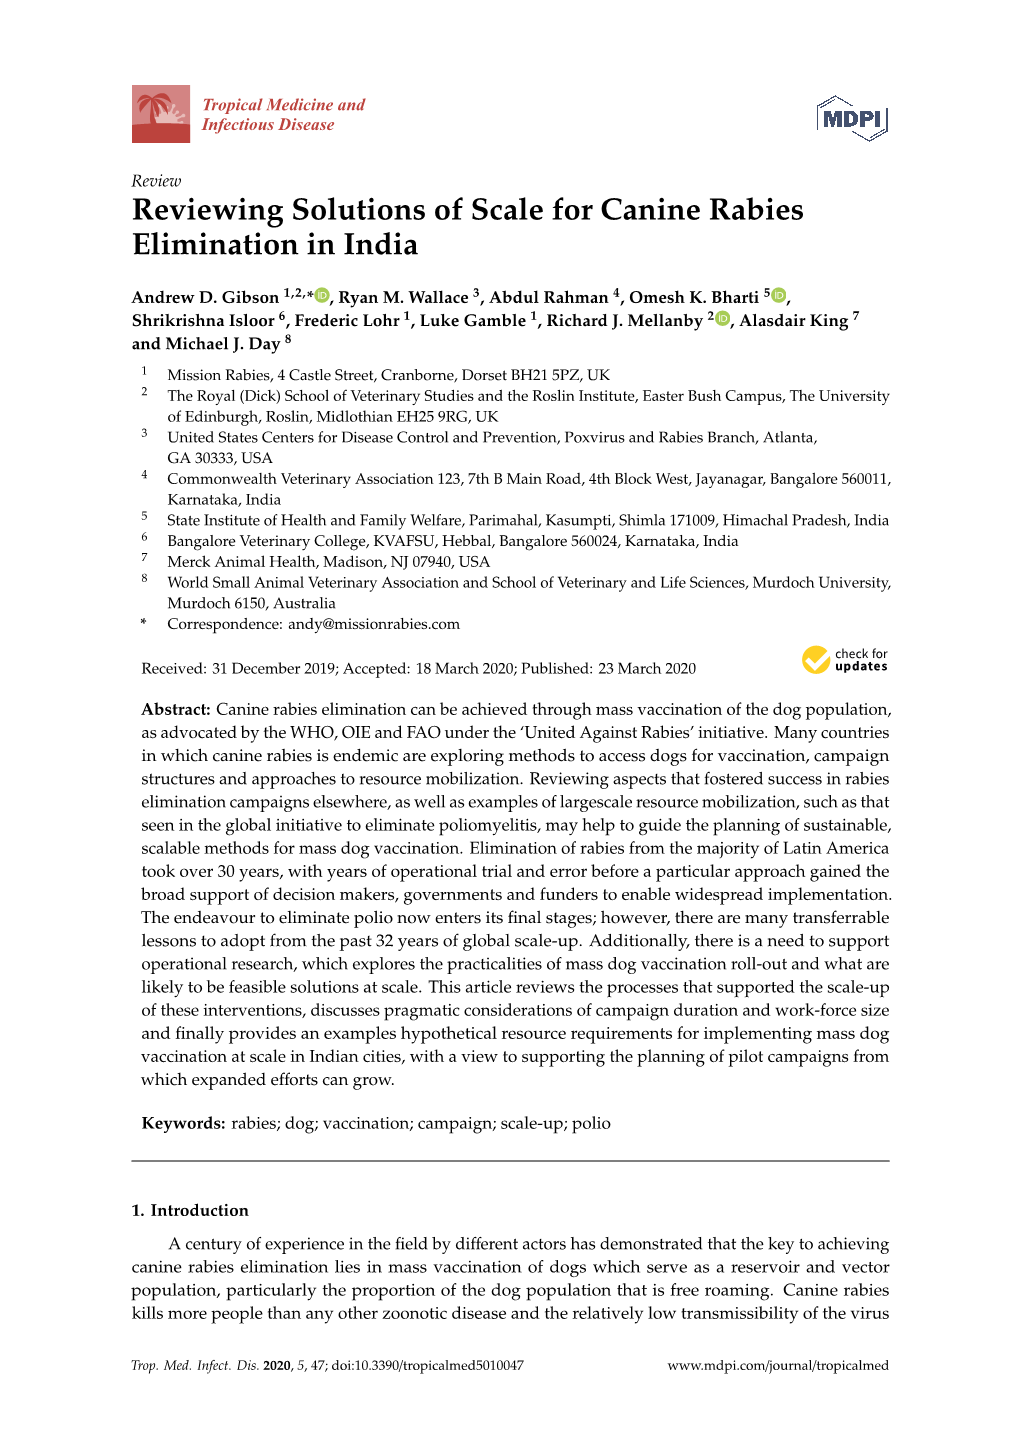 Reviewing Solutions of Scale for Canine Rabies Elimination in India